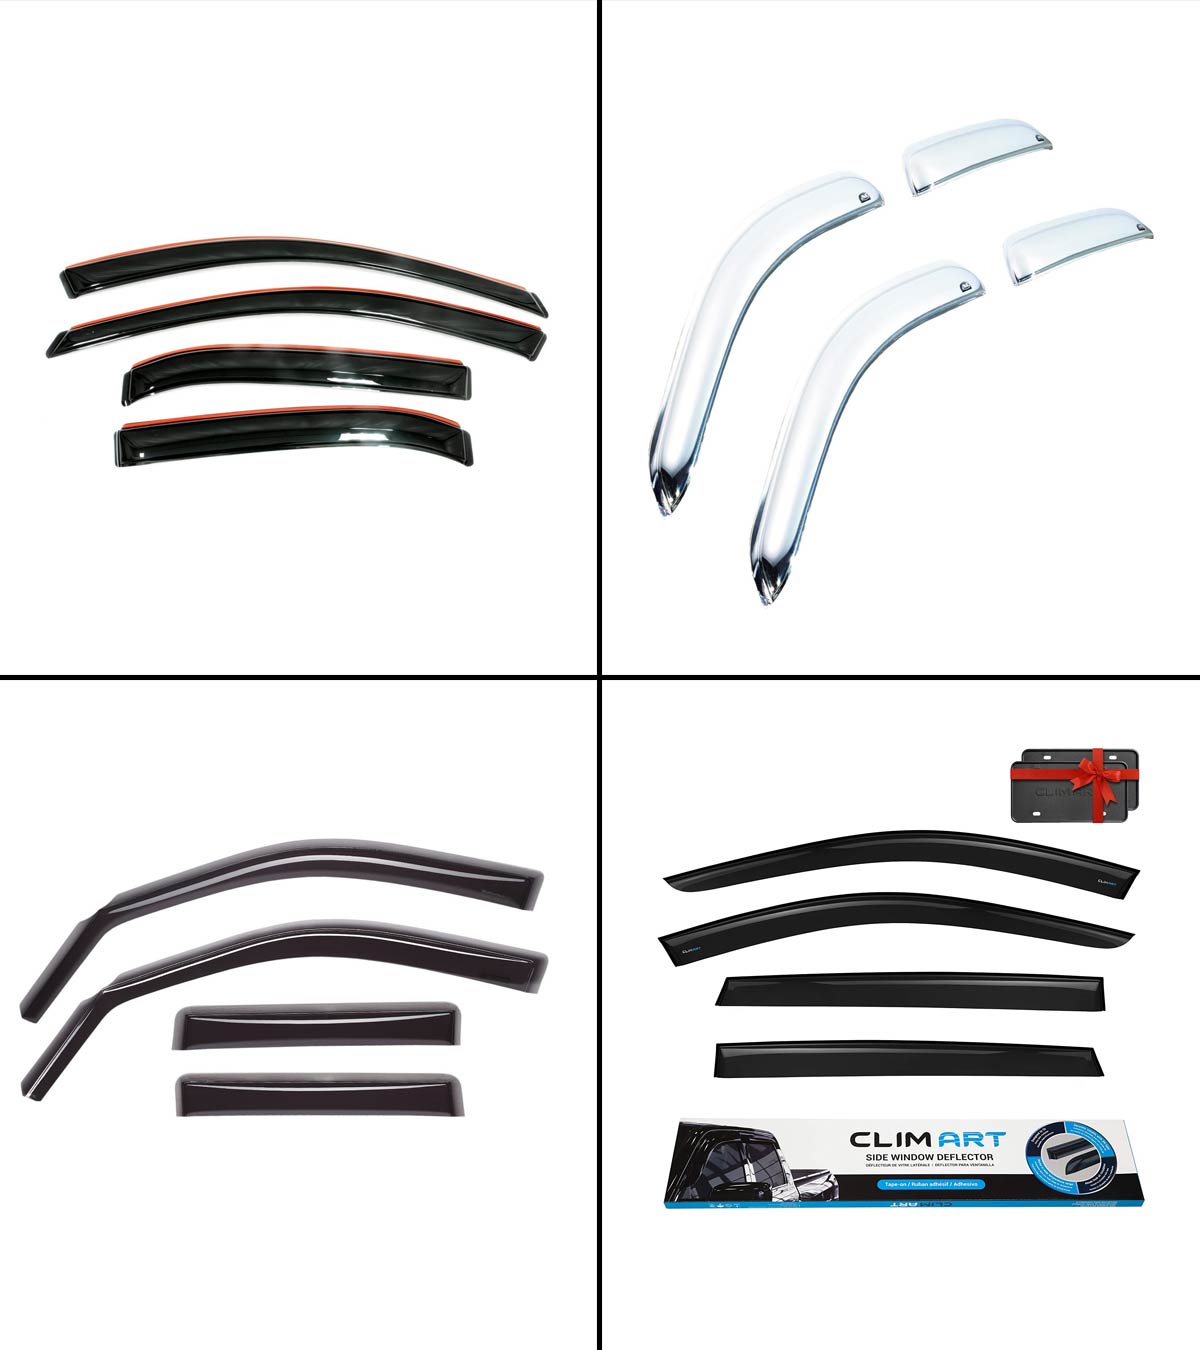 7 Best Window Deflectors For Your Car Windows & Buying Guide For 2023